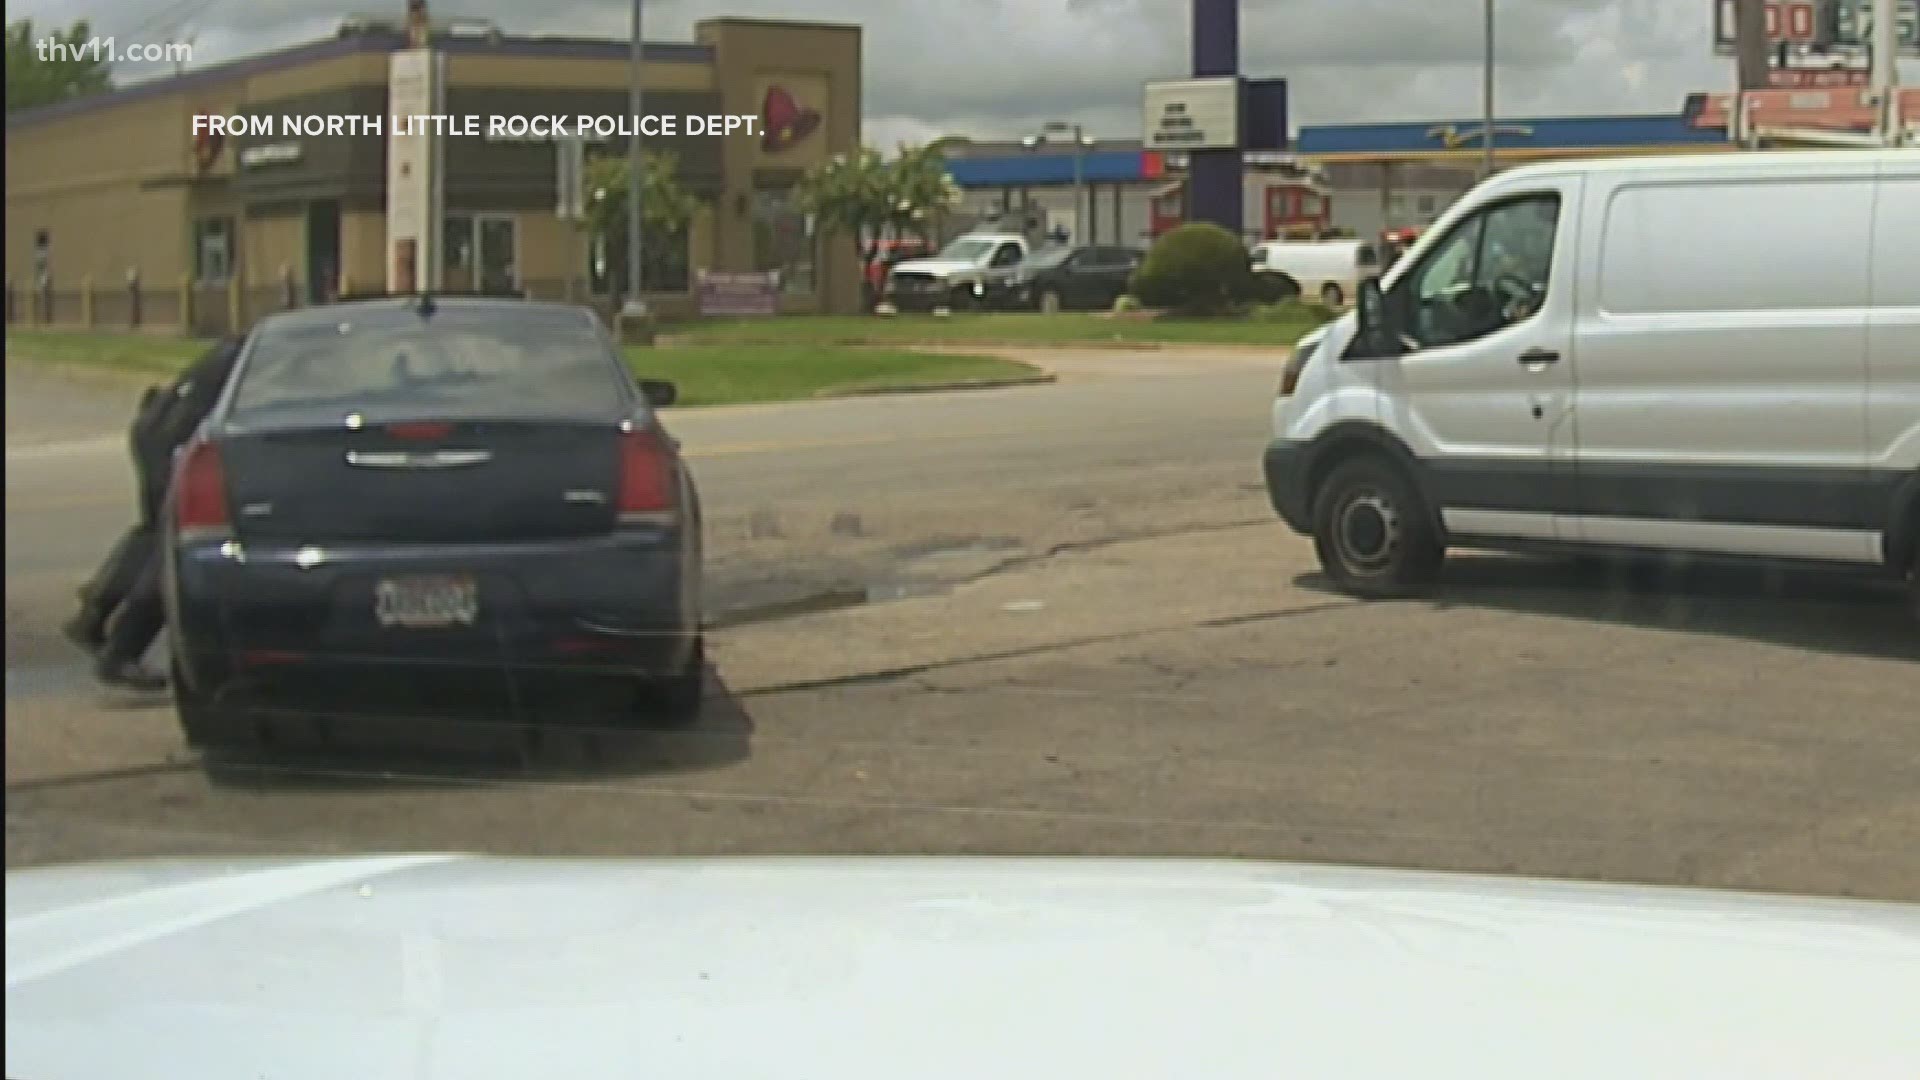 We're getting a look at the traffic stop where a North Little Rock police officer was dragged by a fleeing car.